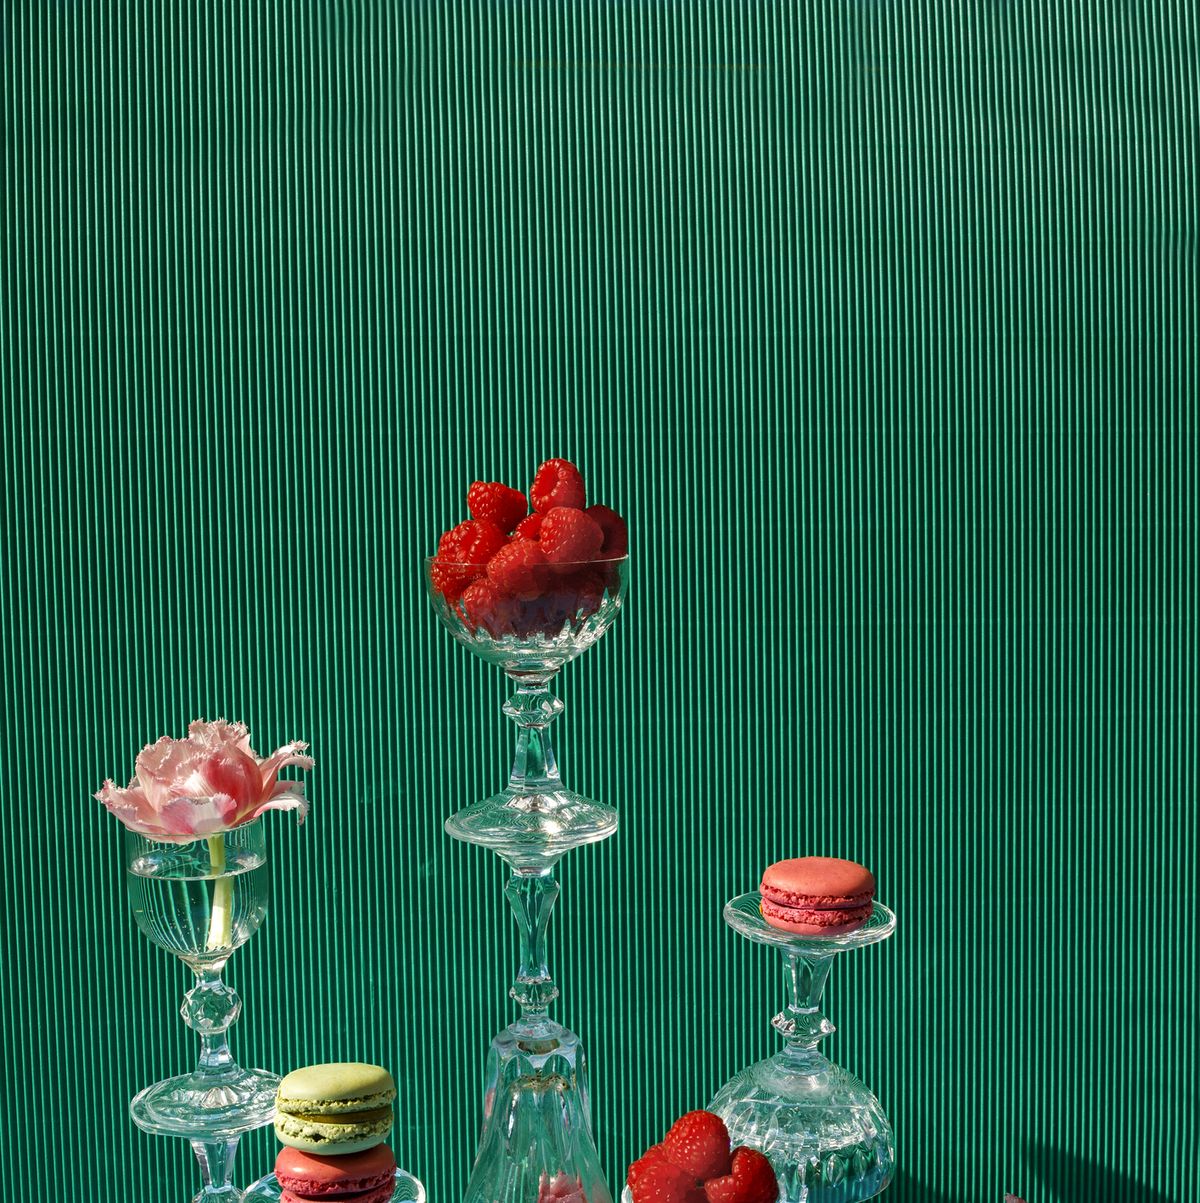 https://hips.hearstapps.com/hmg-prod/images/close-up-of-macarons-and-pink-flowers-on-the-green-royalty-free-image-1694096407.jpg?crop=1.00xw:0.668xh;0,0.229xh&resize=1200:*